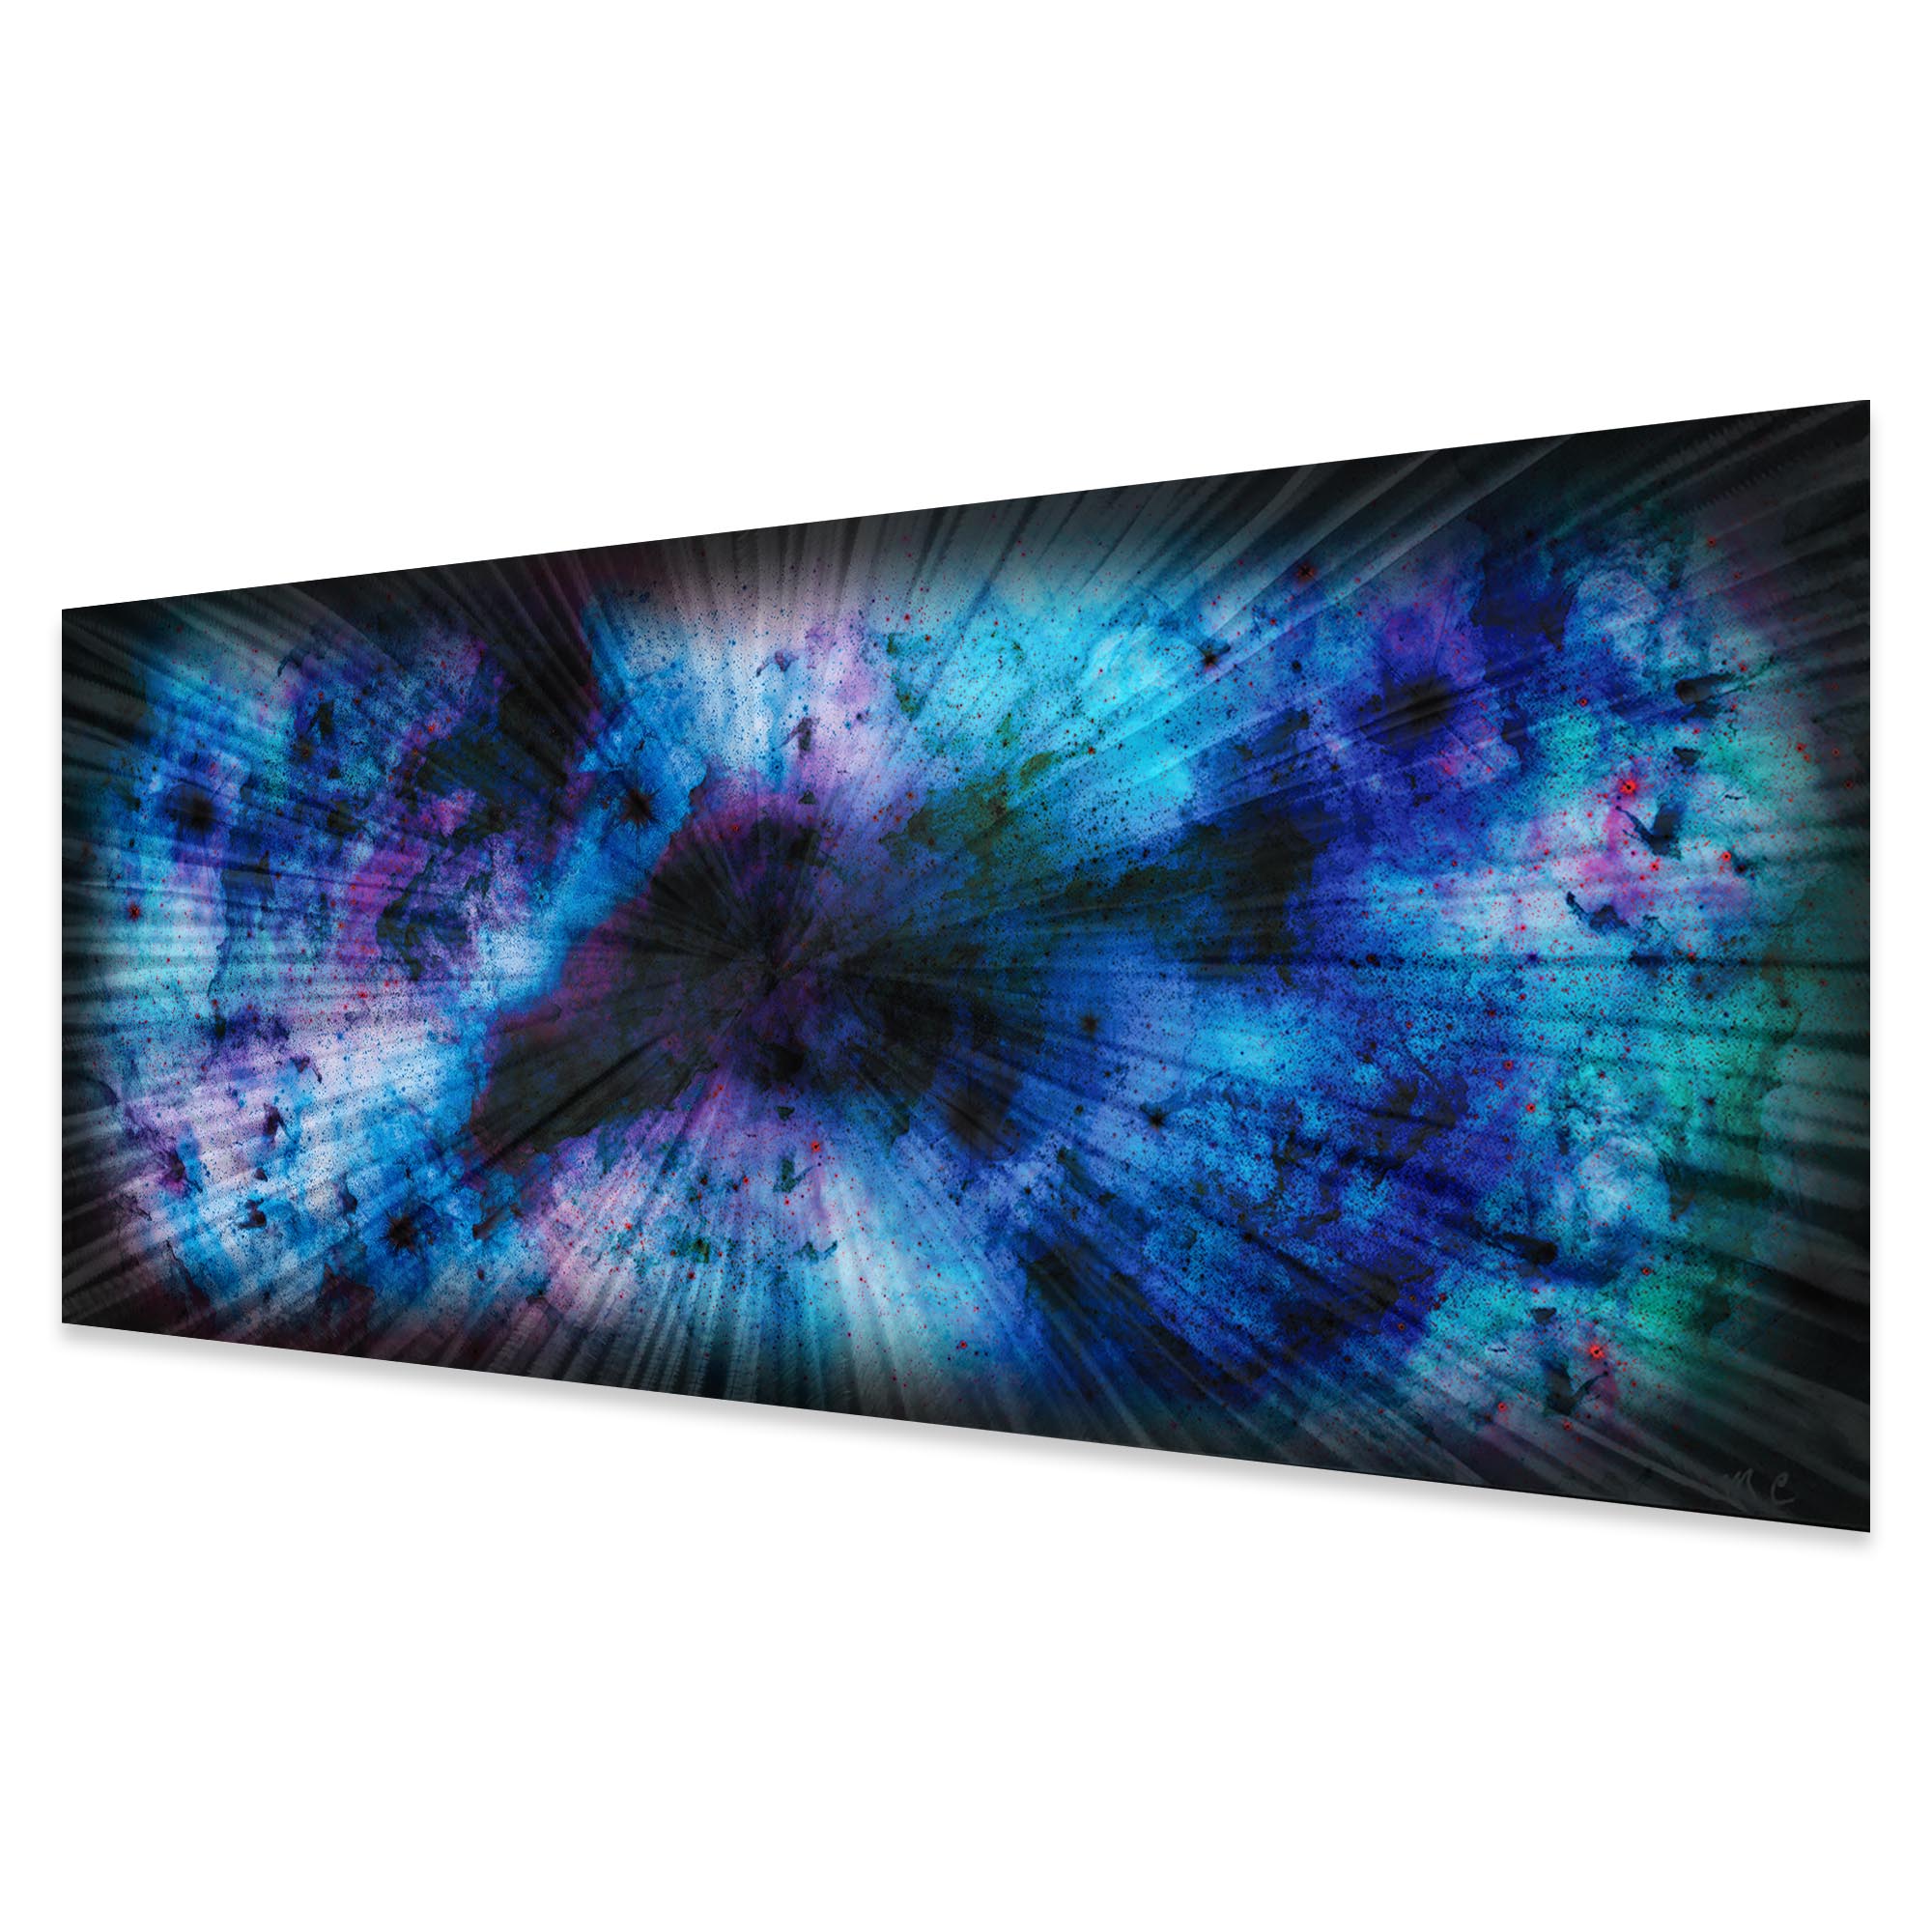 Blue Nebula by Helena Martin - Original Abstract Art on Ground and Colored Metal - Image 2